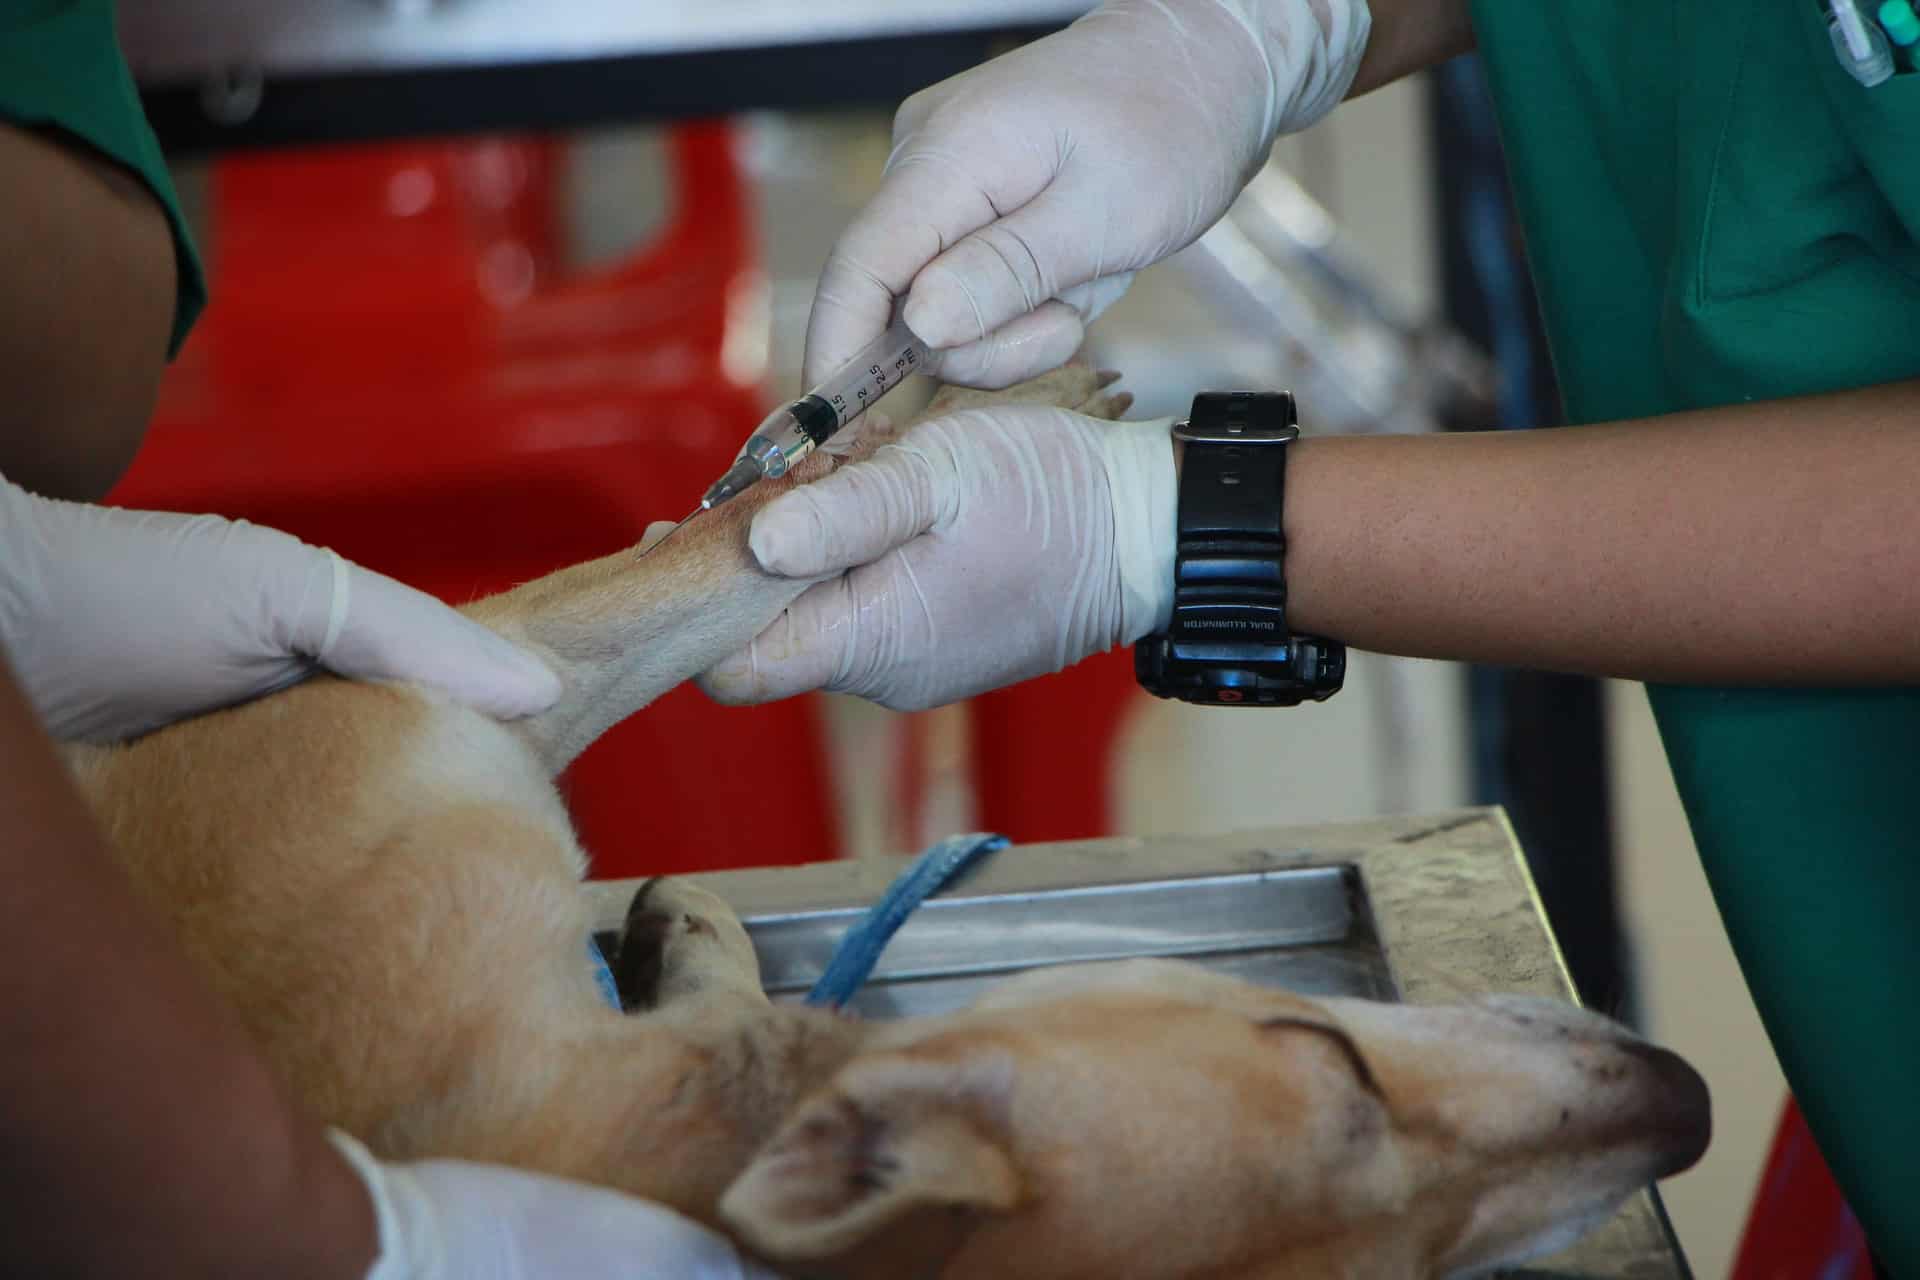 A dog getting a vaccine at a vet